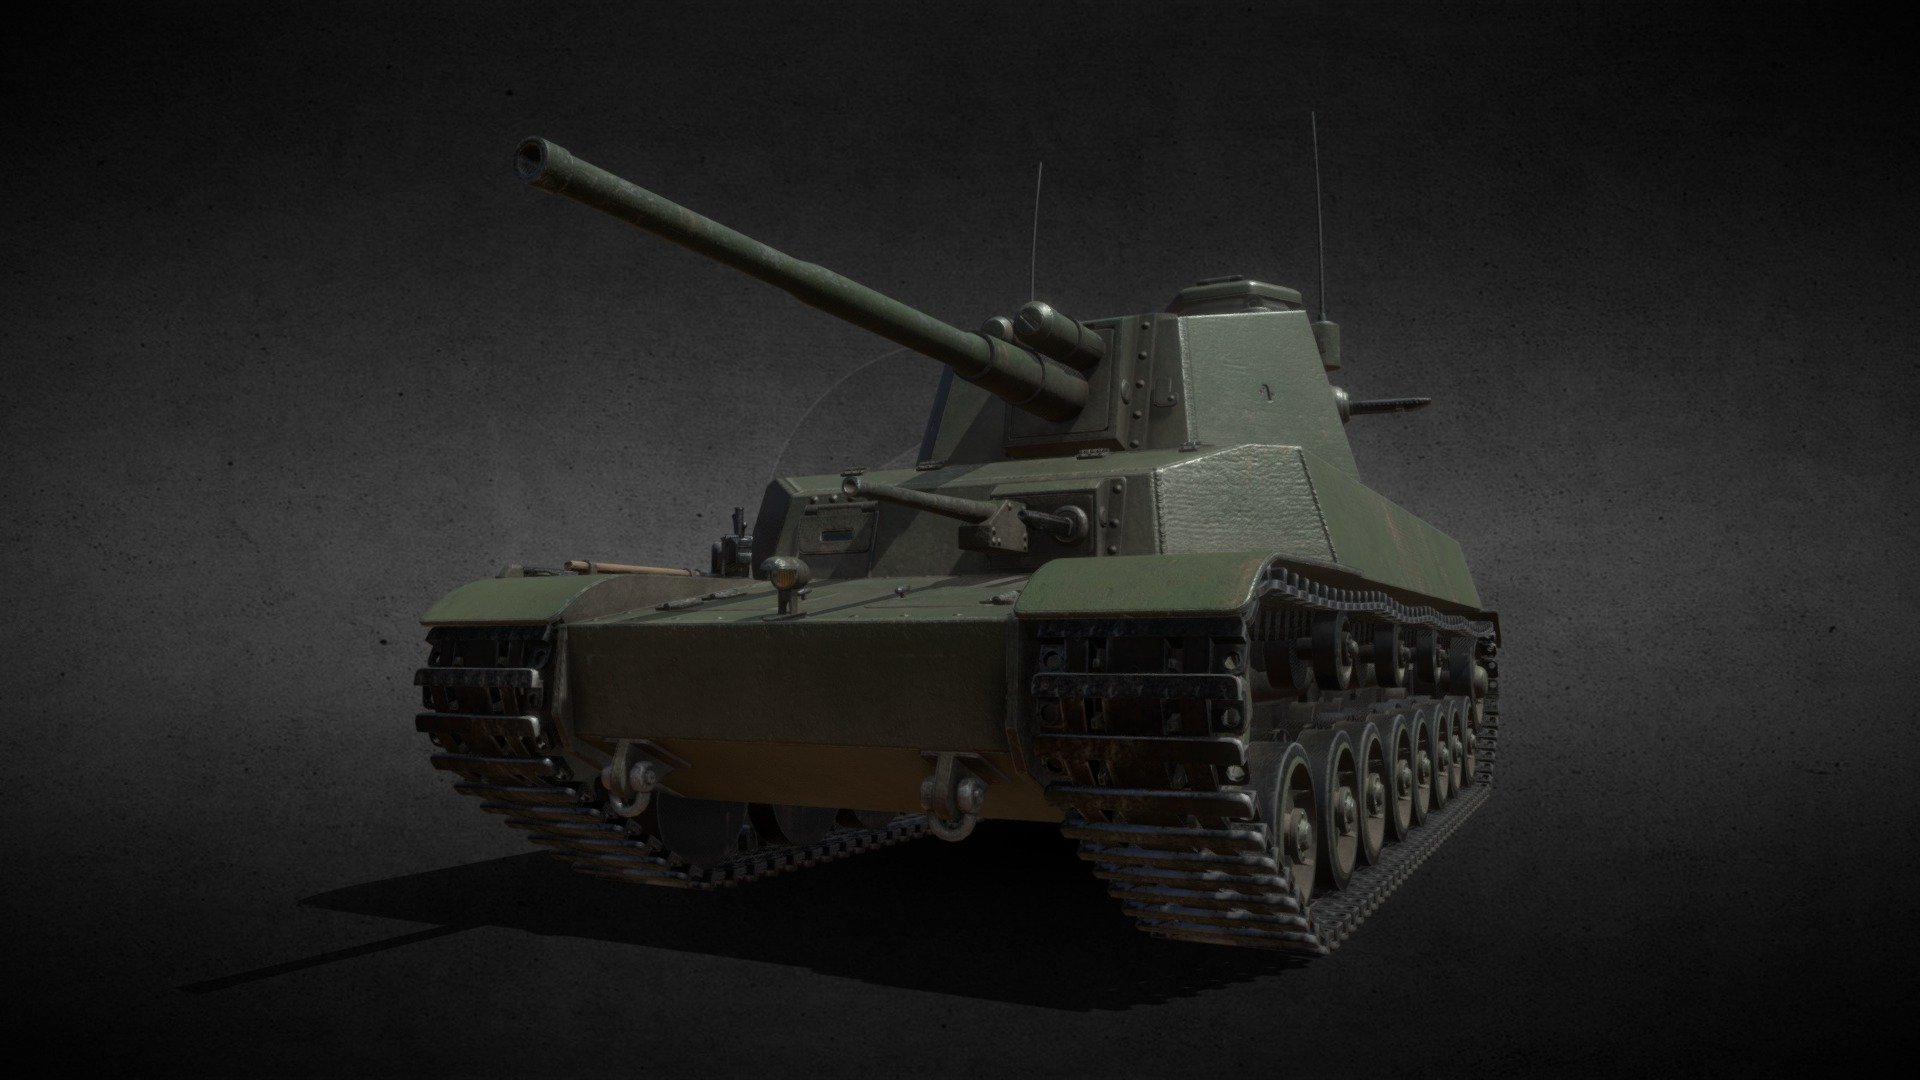 Ready to use Type 5 Chi-Ri 3d model

Type 5 Chi-Ri was a medium tank prototype developed to be a more powerful an overall better version of the previous prototype - the Type 4 Chi-To medium tank (3D model also avalible).
Only one incomplete prototype was built.

Green paint variant.

Ready to use in games or renders.

More Japanese WW II models in the collection: https://skfb.ly/oyoDN

More Tanks and Parts models in the collection: https://skfb.ly/oyoDV

More cheap or free military models in the collection: https://skfb.ly/ooYNo

4096x4096 textures:


albedo
roughness
metalness
normal map
ambient occulusion map

modelled in Blender textured in Adobe Substance 3D Painter - Type 5 Chi-Ri (IJA Medium Tank) - Buy Royalty Free 3D model by AdamKozakGrafika 3d model